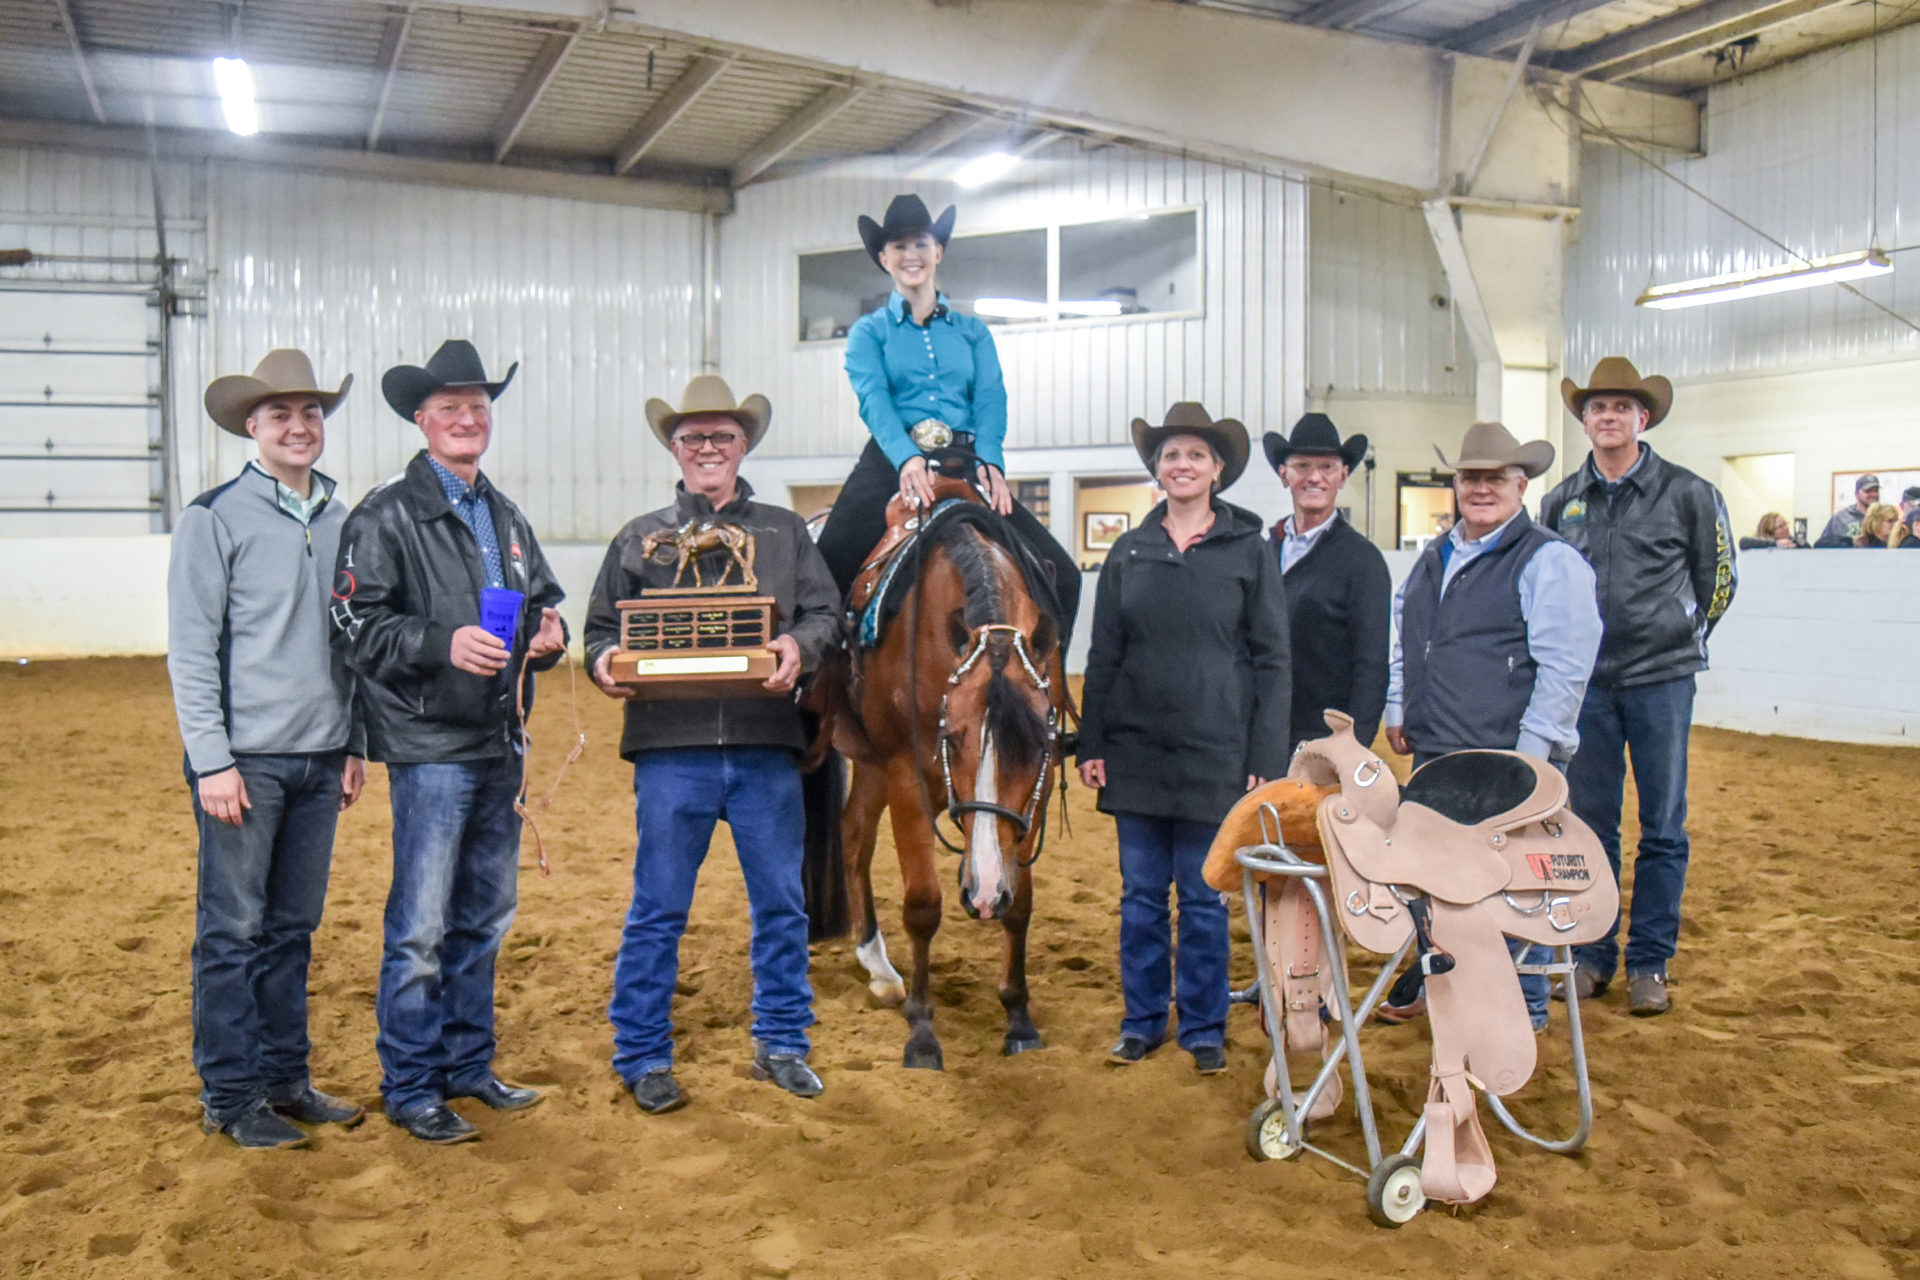 Clark and instructors pose for a picture with the winner of the 2019 Clark Bradley Western Pleasure Futurity, Leah Palm